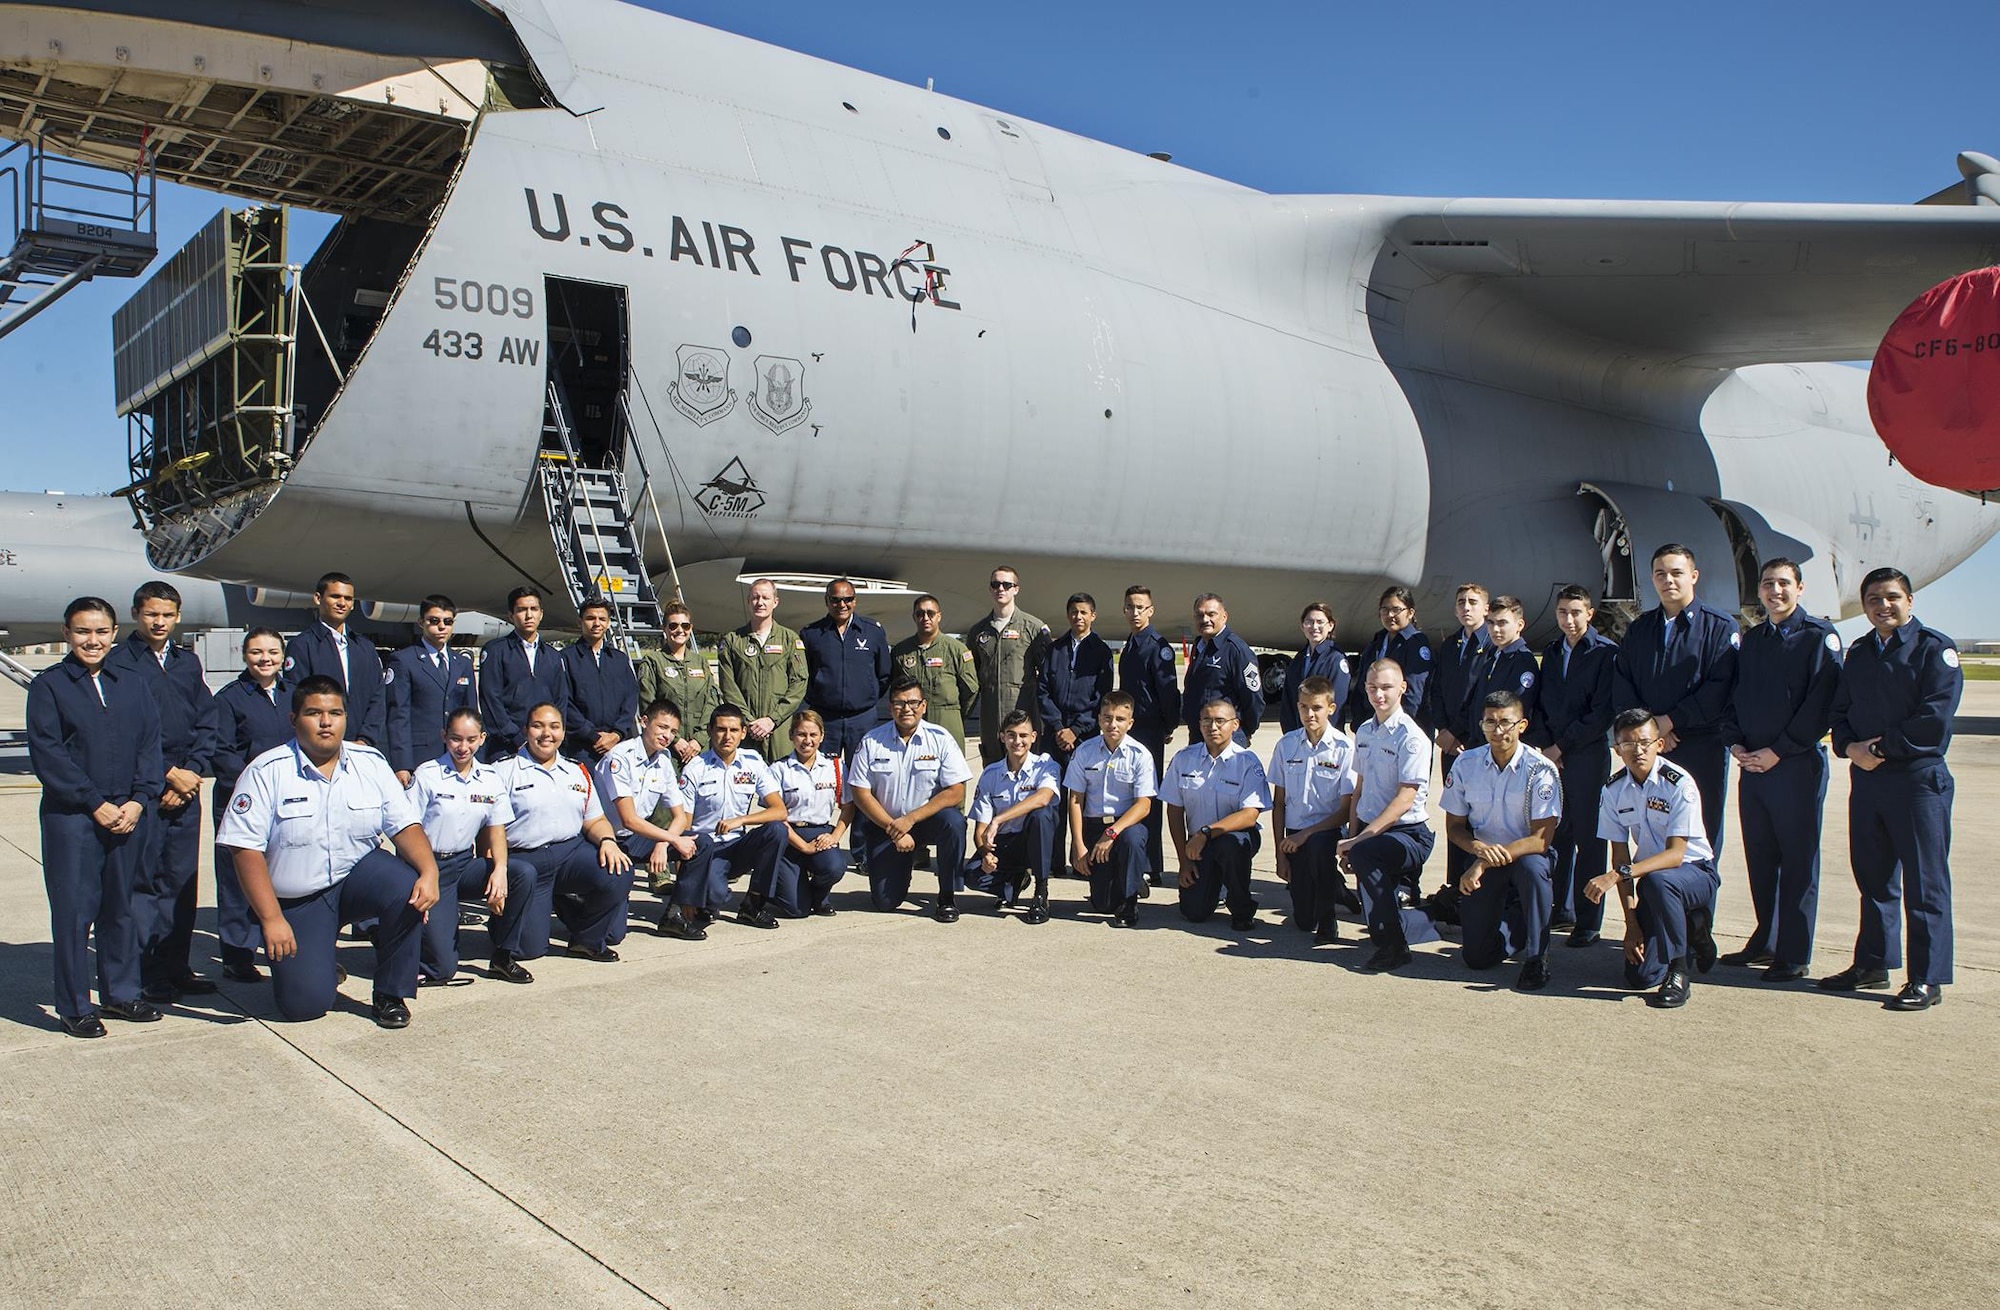 Air Force Junior ROTC students from United High School pose for a group photo in front of a C-5M Super Galaxy aircraft Oct. 21, 2016 at Joint Base San Antonio-Lackland, Texas. Students also watched an Air Force basic training graduation parade, received a 433rd Airlift Wing mission briefing, and had lunch at the Live Oak dining facility on base. (U.S. Air Force photo by Benjamin Faske)